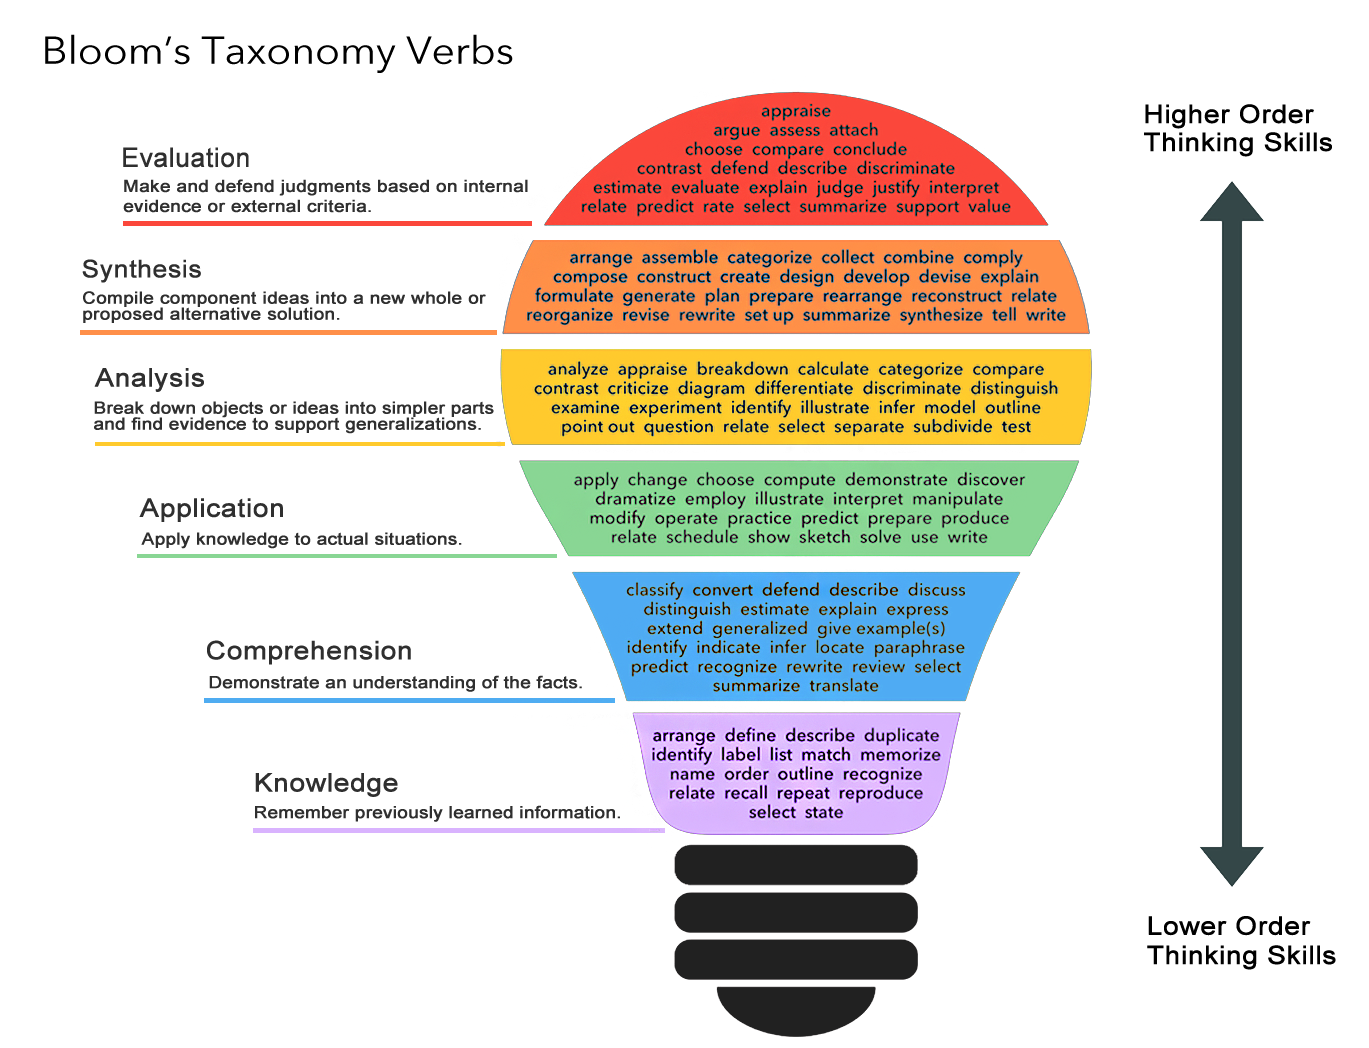 Bloom's Taxonomy Verbs for Knowledge, Comprehension, Application, Analysis, Synthesis, and Evaluation.